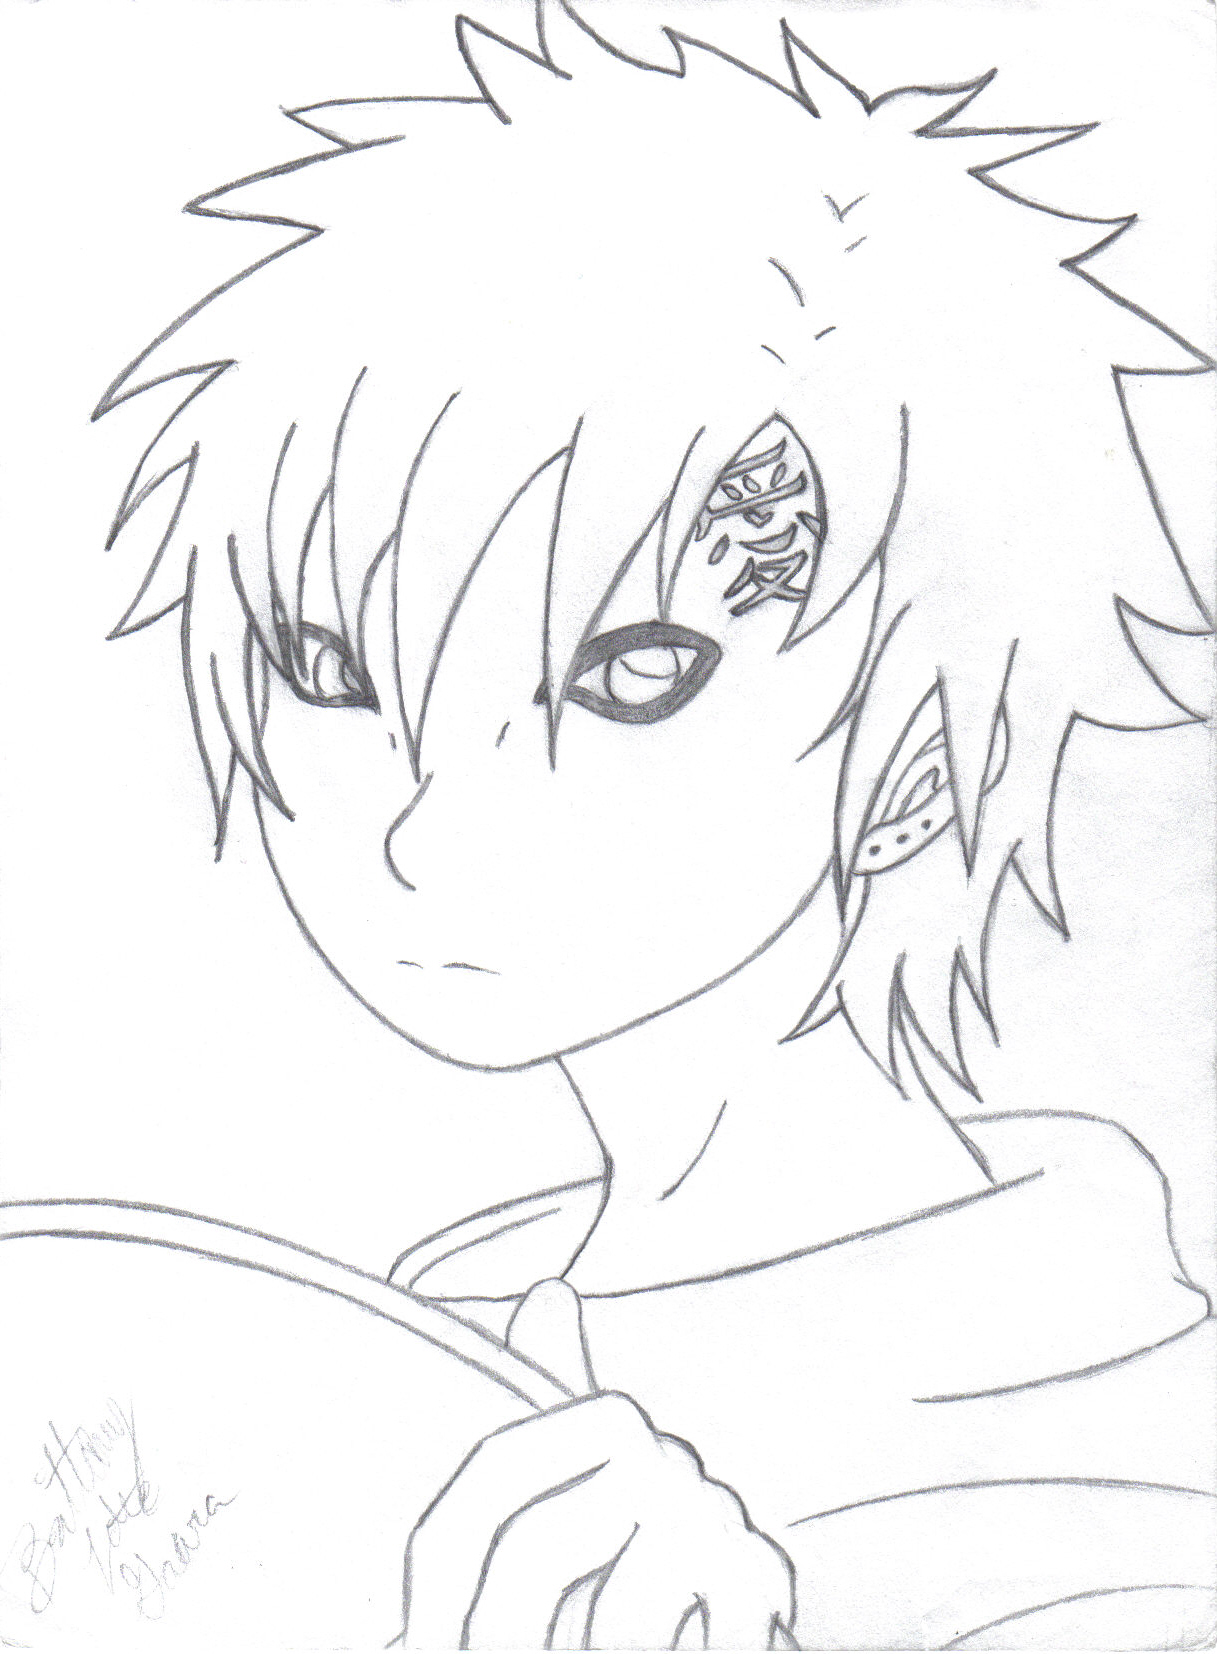 Drawn Gaara Kazekage (not finished) by Kaybe